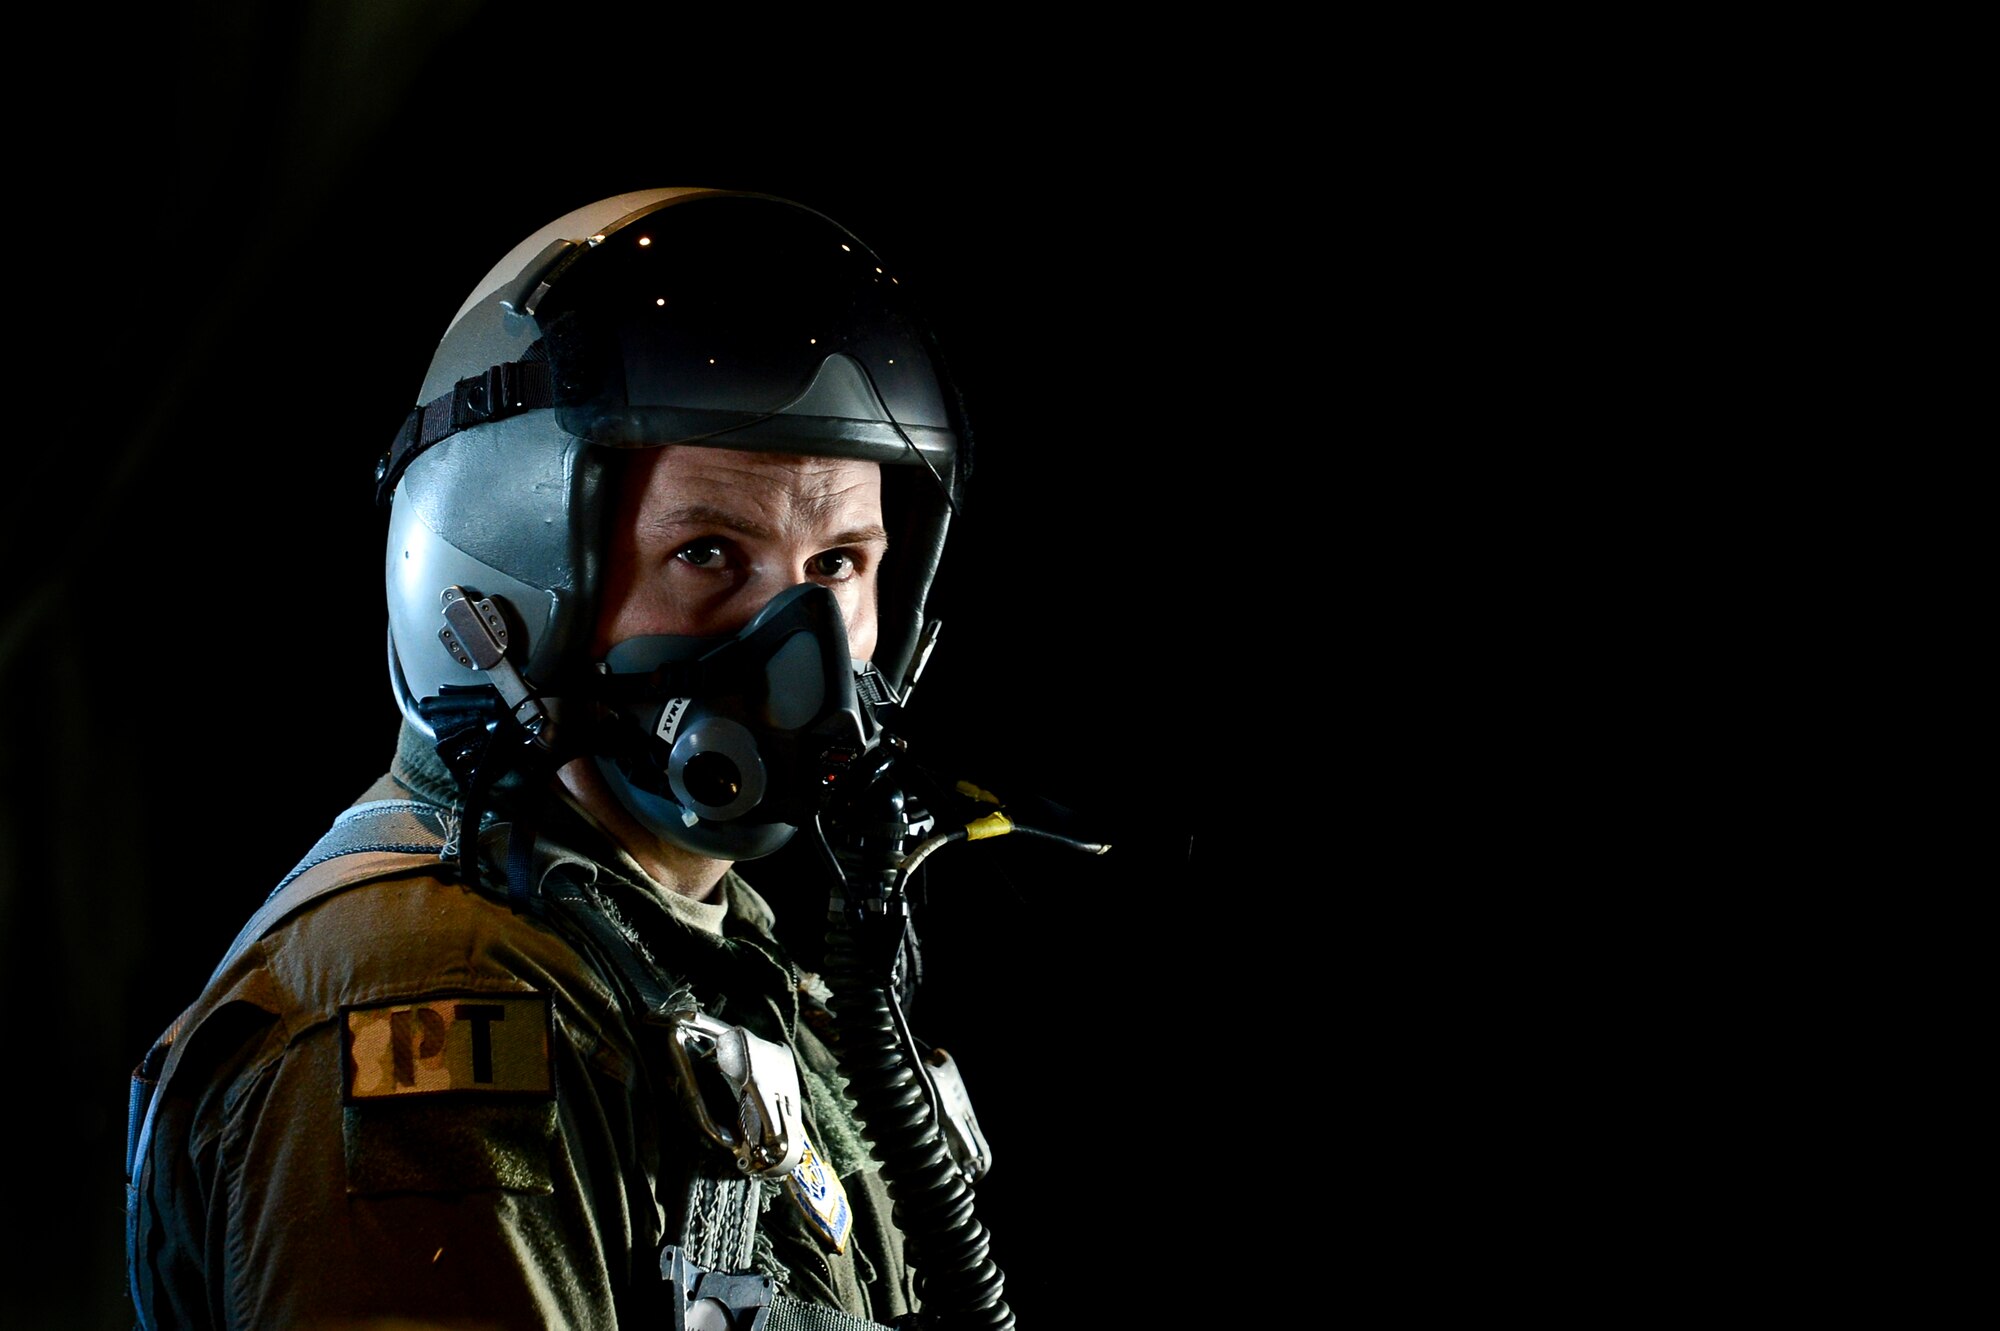 Air Force technical sergeant prepares for a high altitude low opening parachute jump